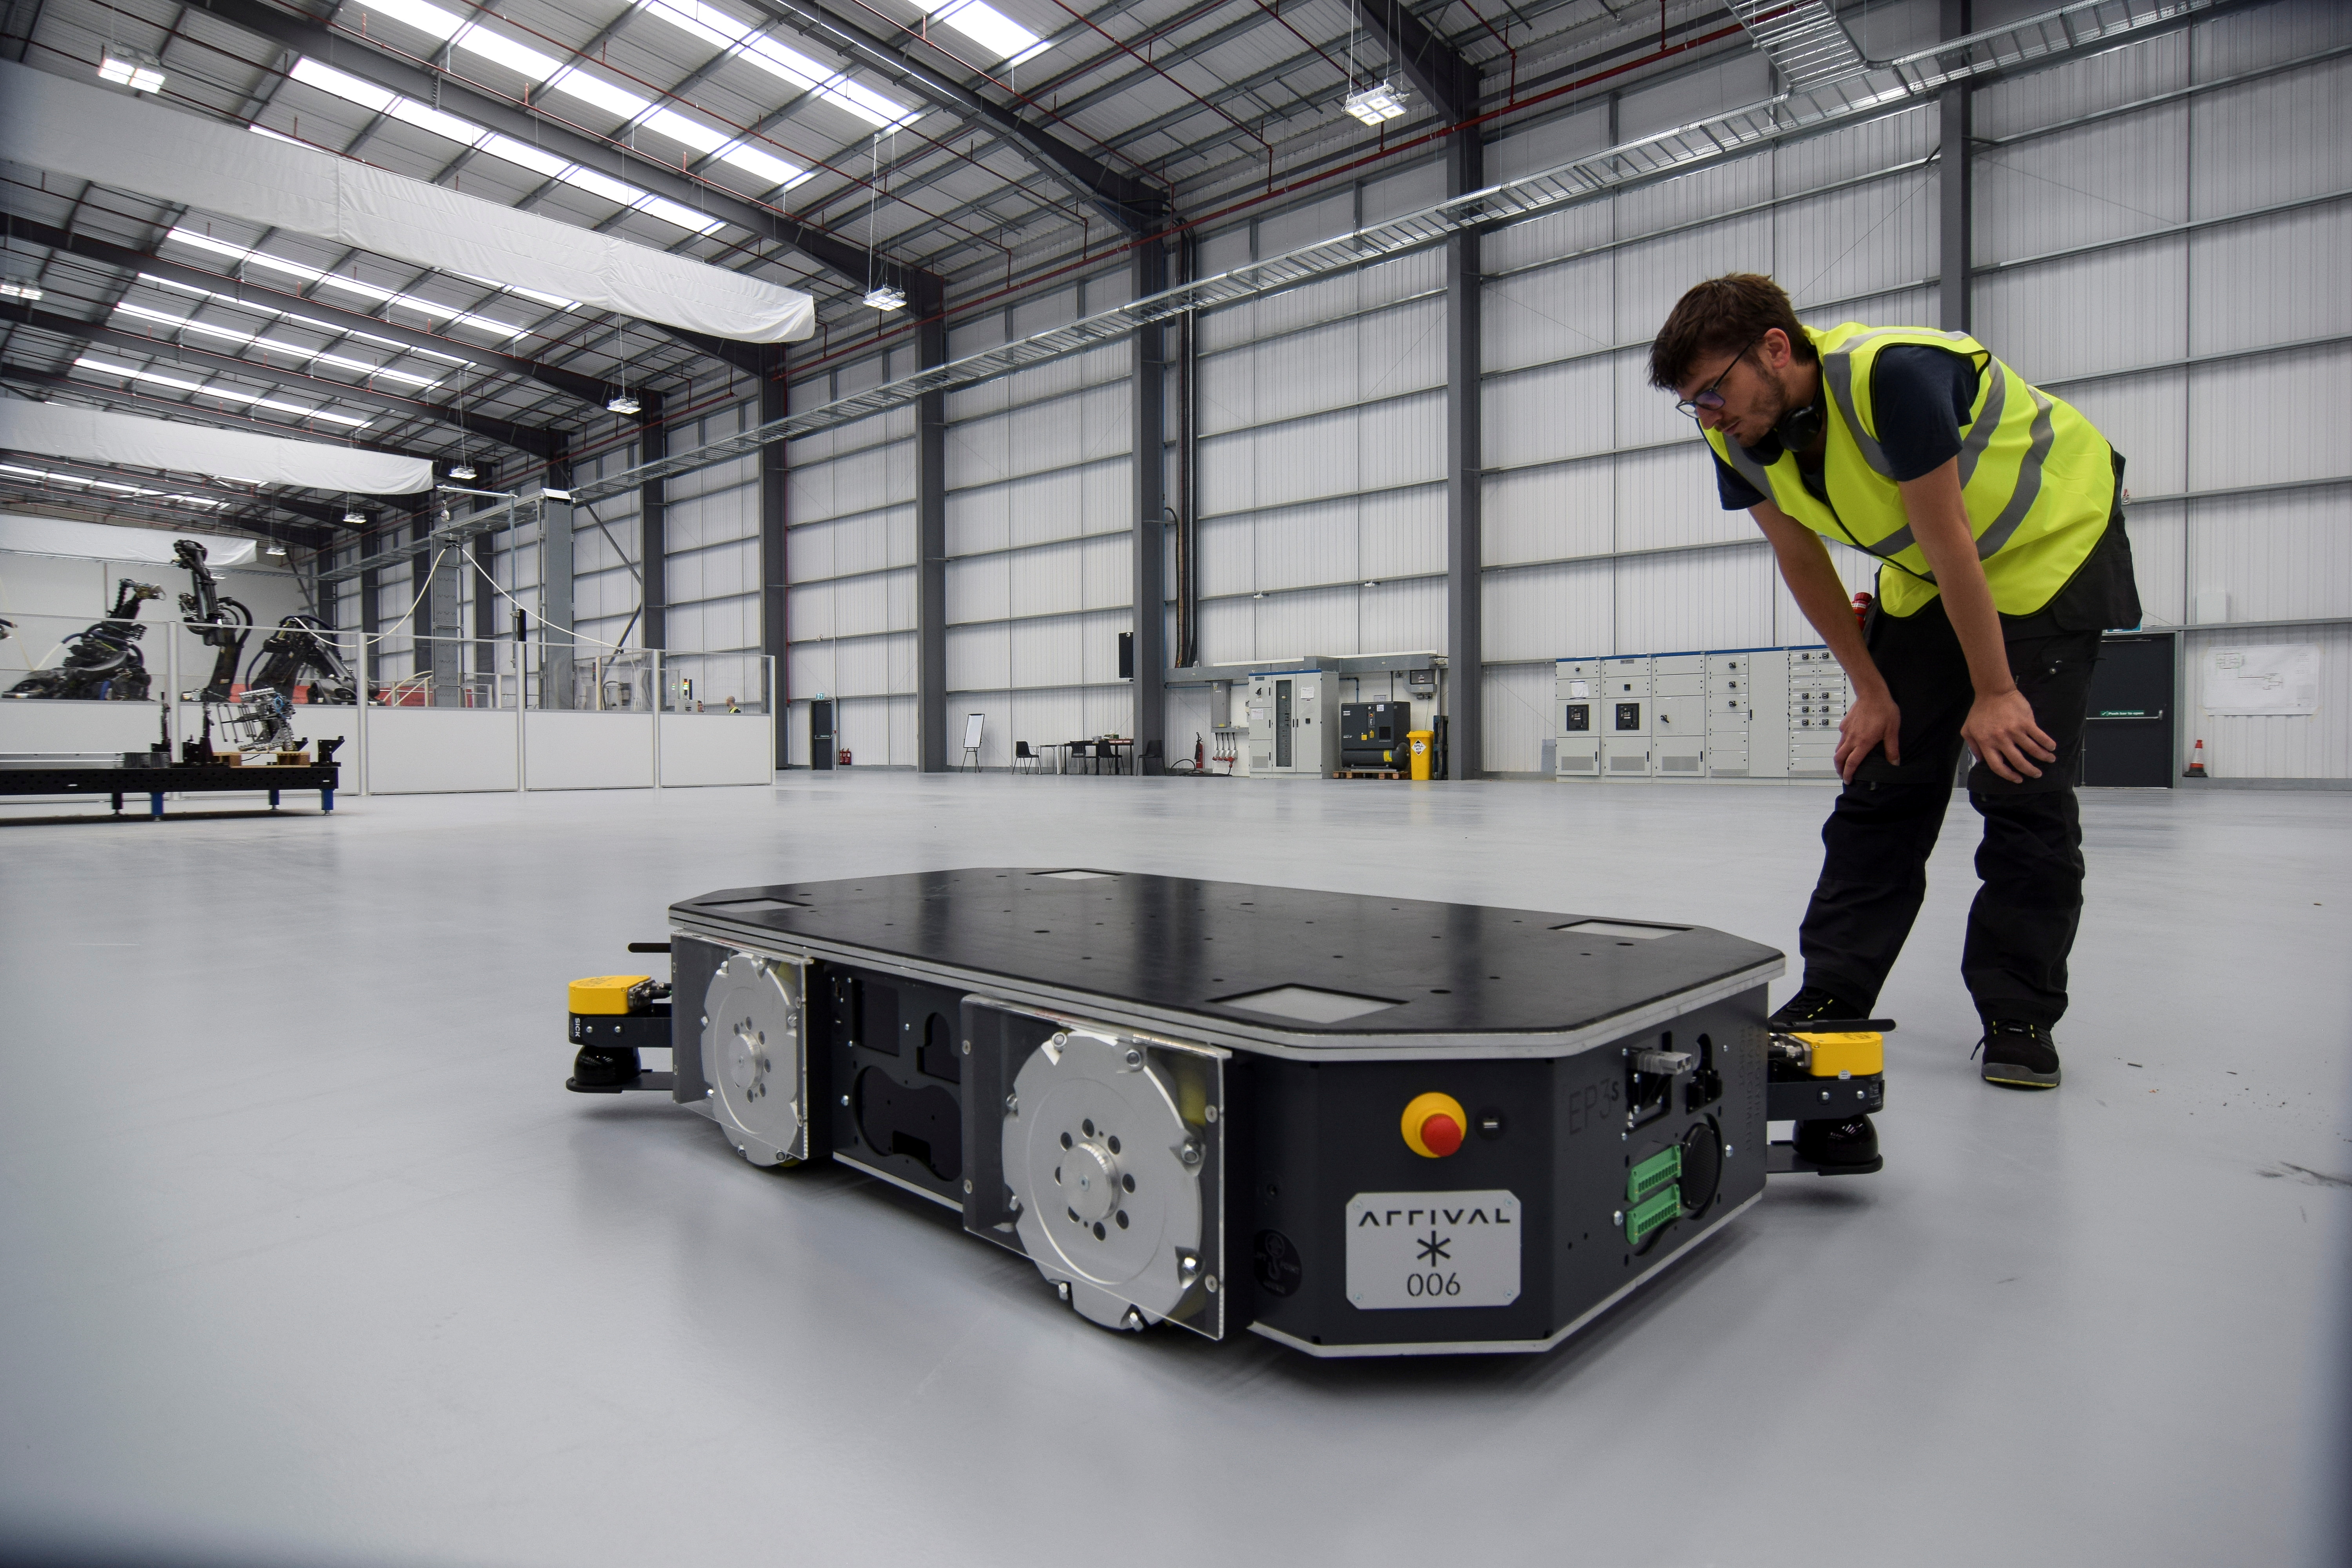 Electric vehicles maker Arrival's low-cost UK "microfactory" in Bicester